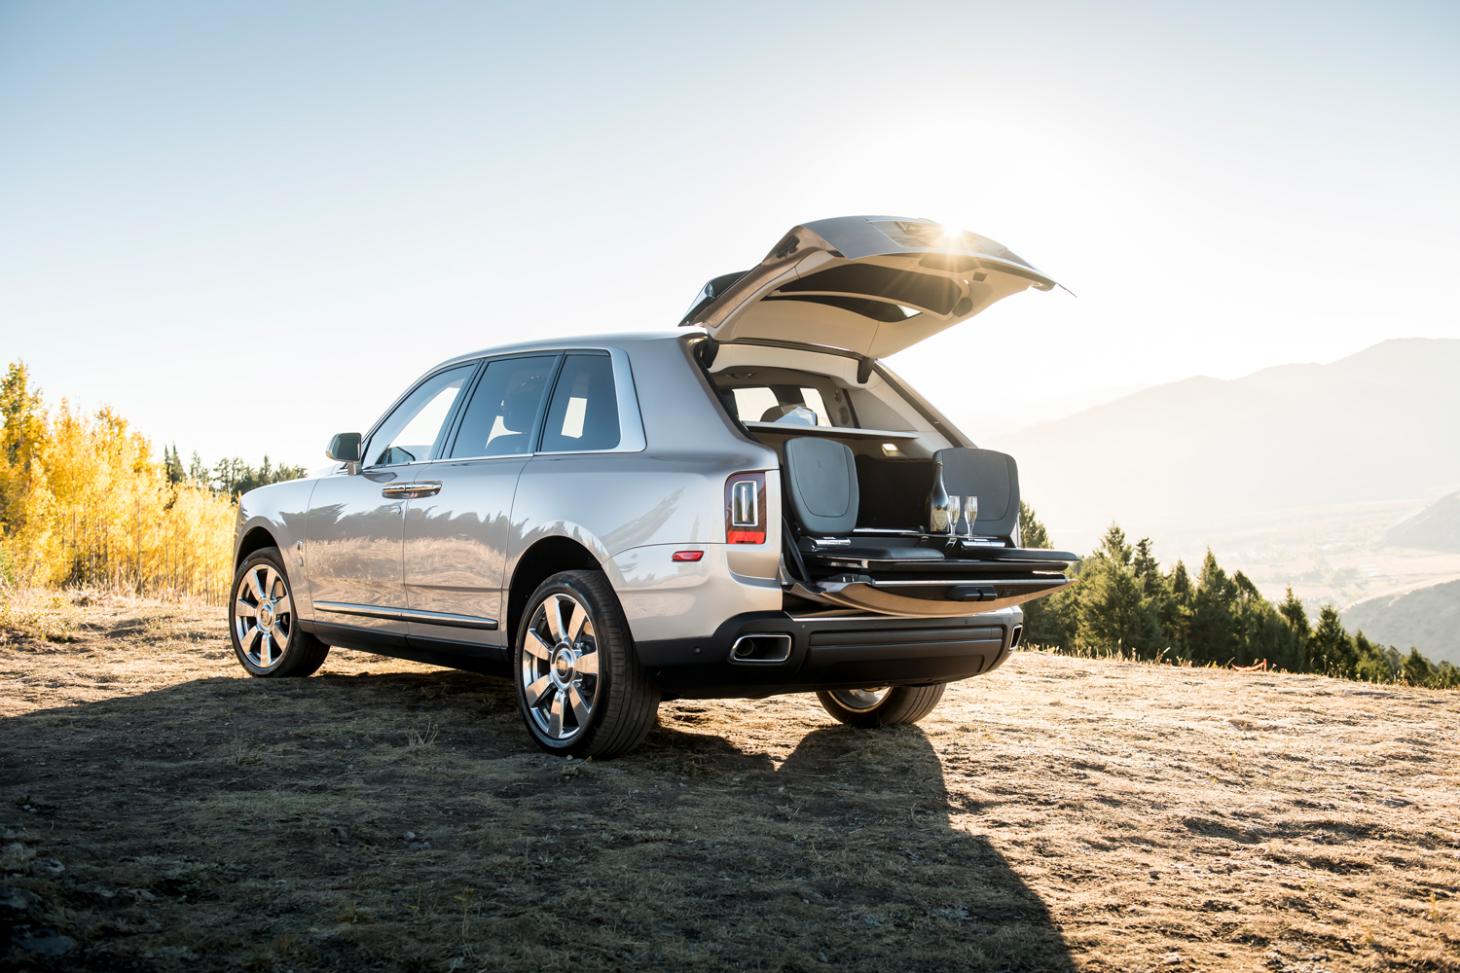 Can Rolls Royce's Bold New SUV Conquer The Peaks Of Luxury?. Wallpaper*